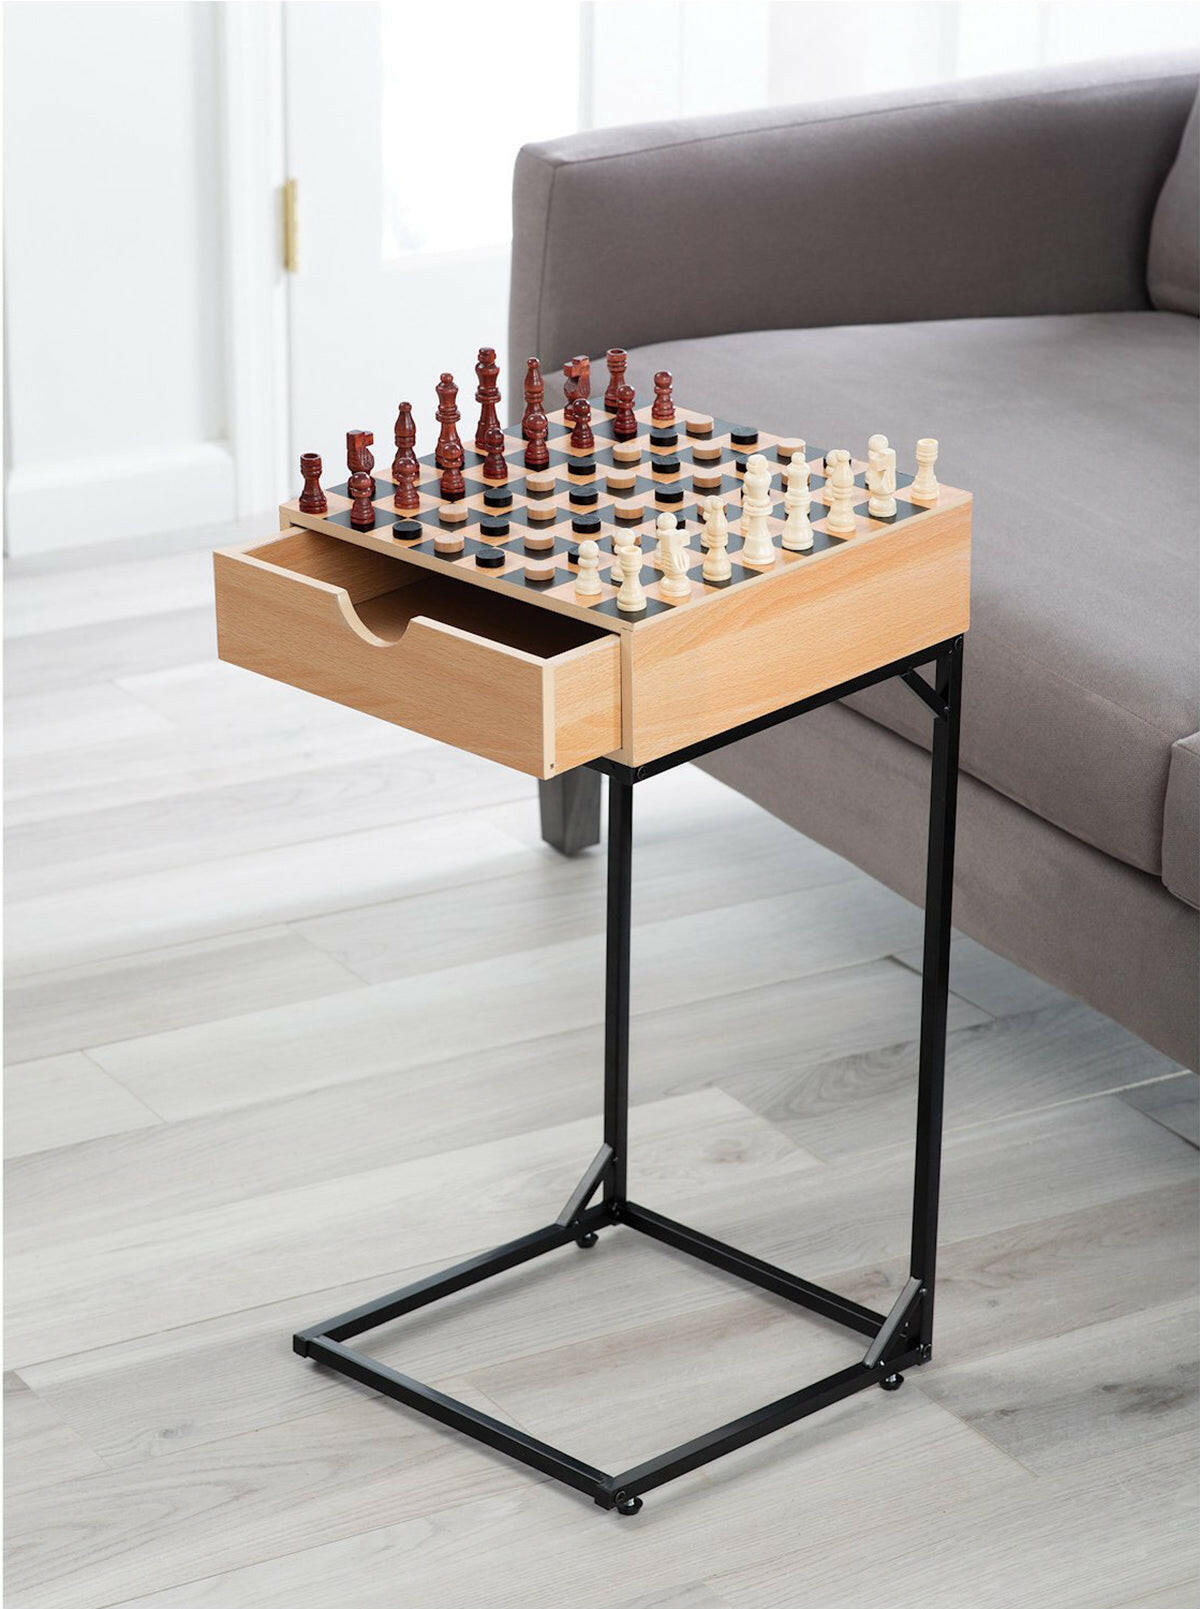 Wooden Chess & Checkers Game Set with Metal Stand.